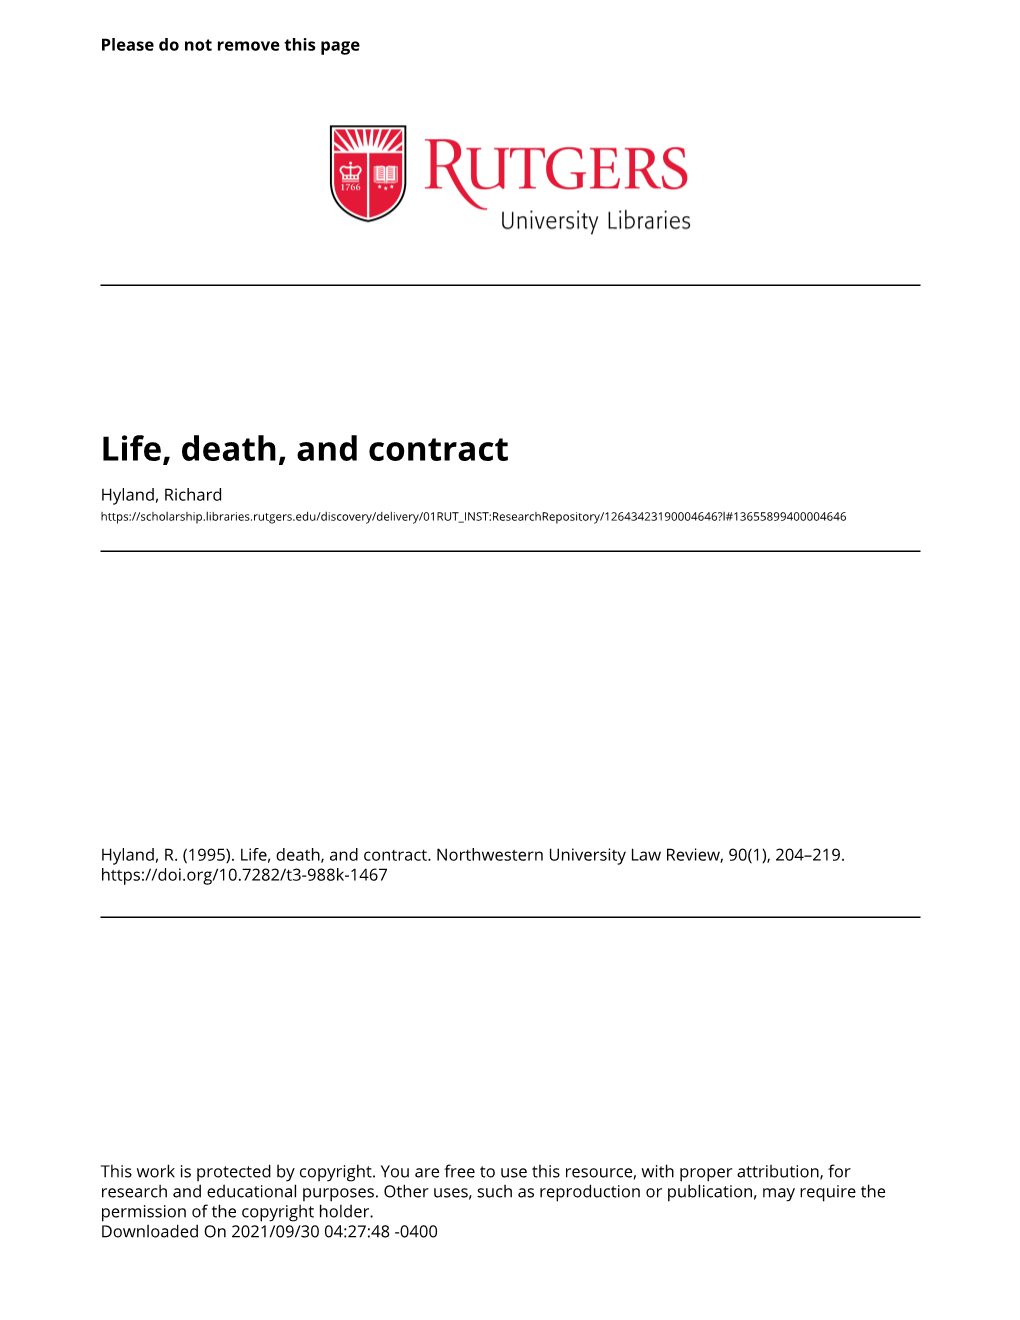 Life, Death, and Contract